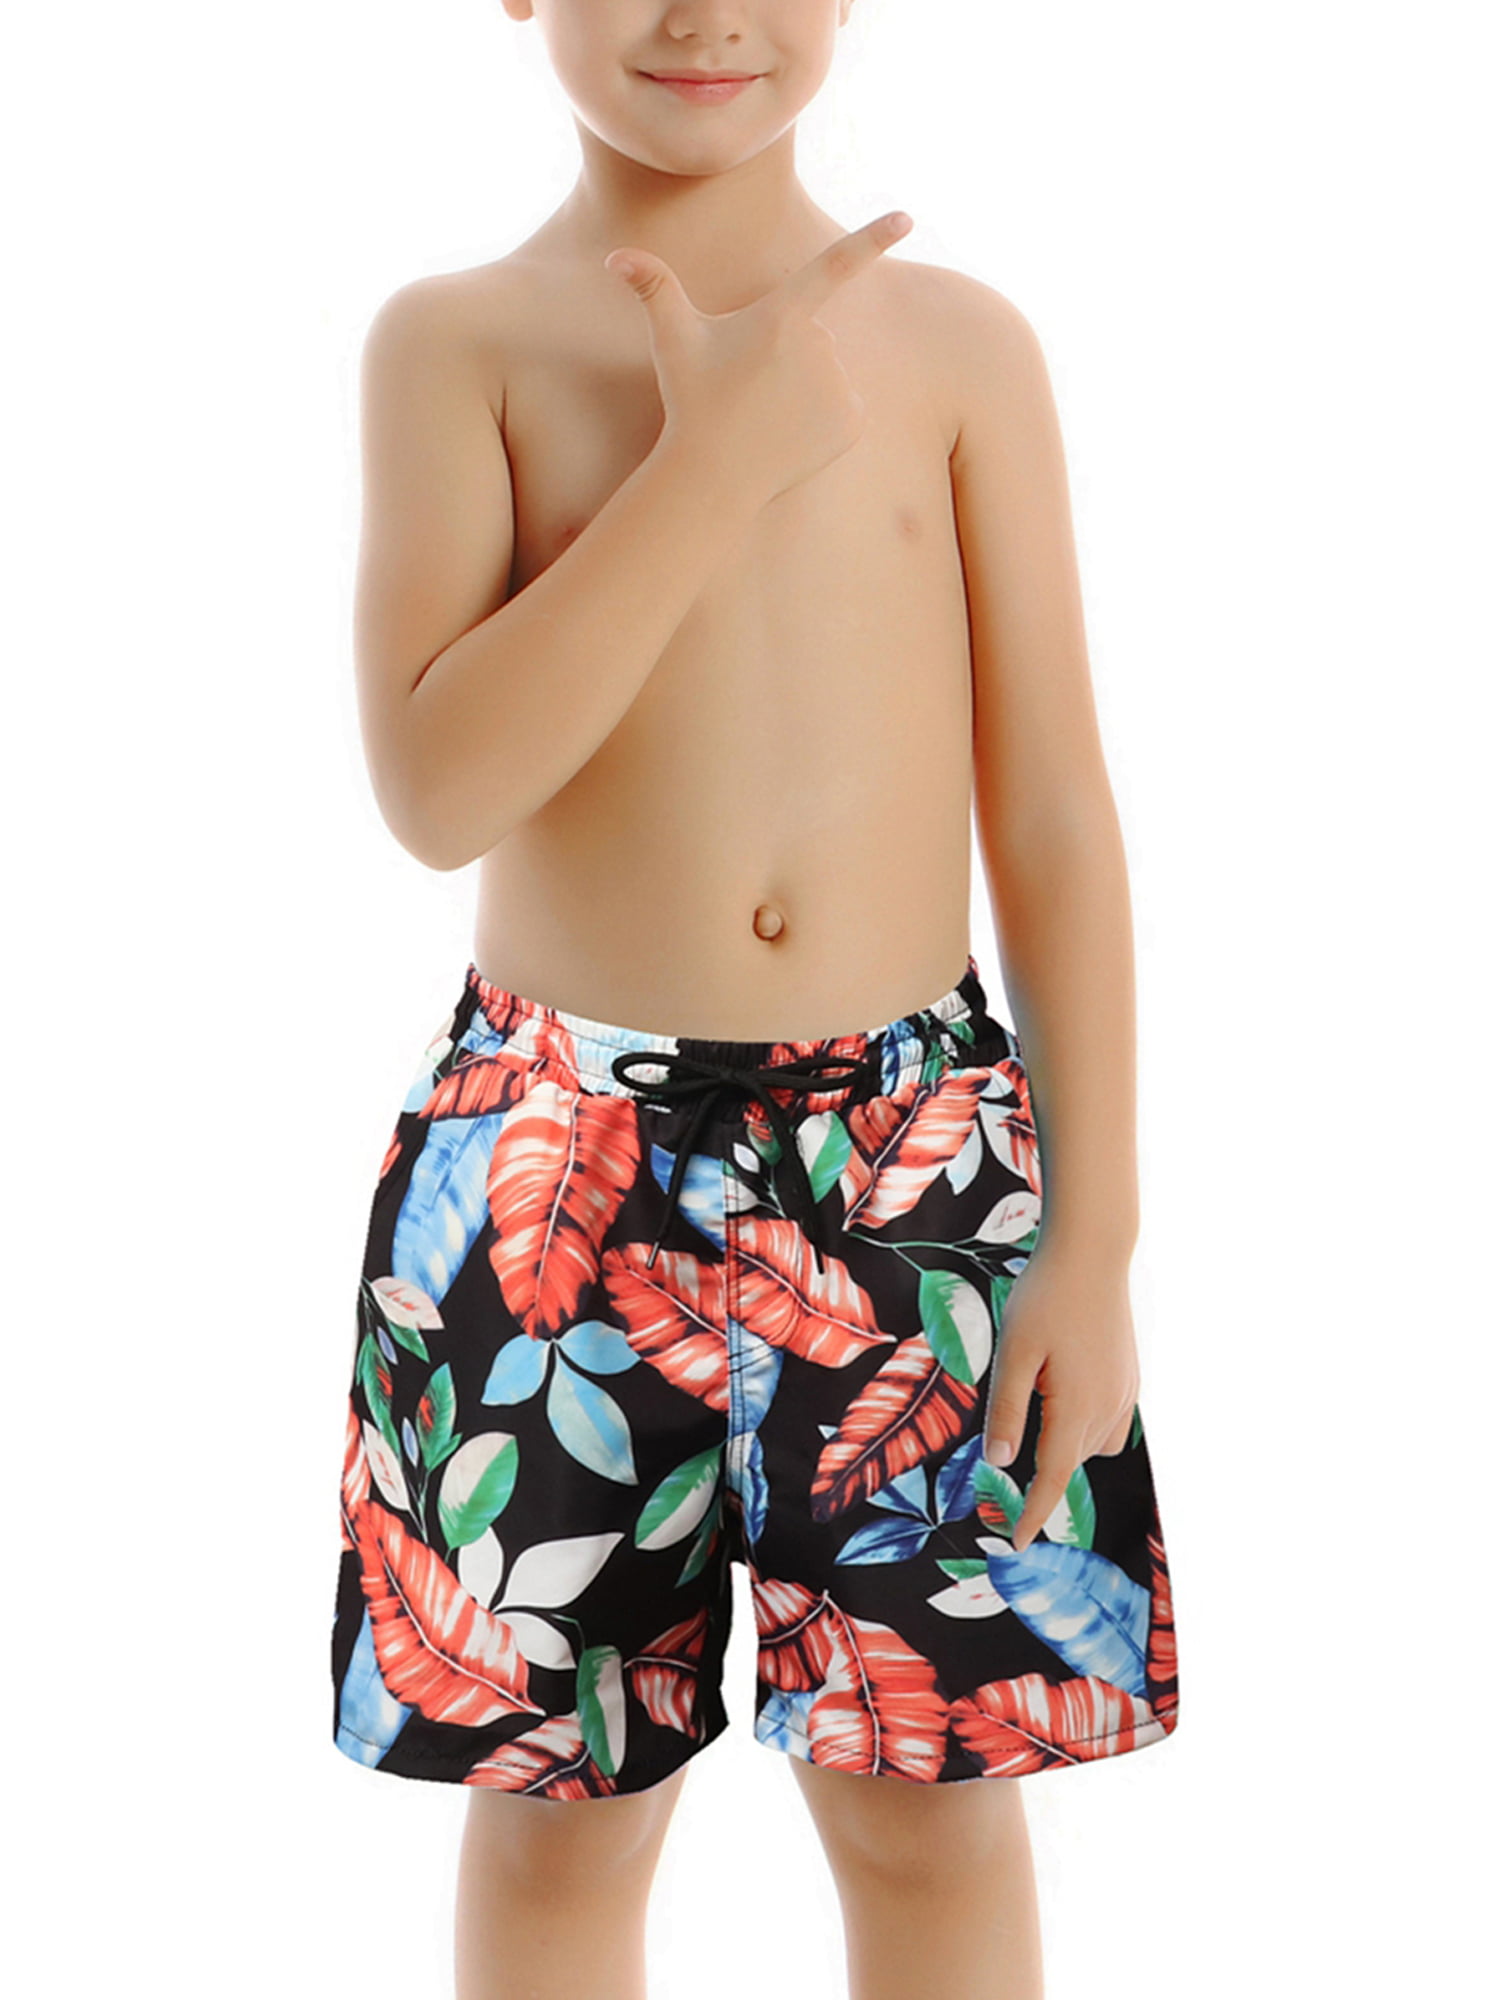 Boys Swim Trunks Cats and Birds Quick Dry Board Shorts Beach for 7-18 T 